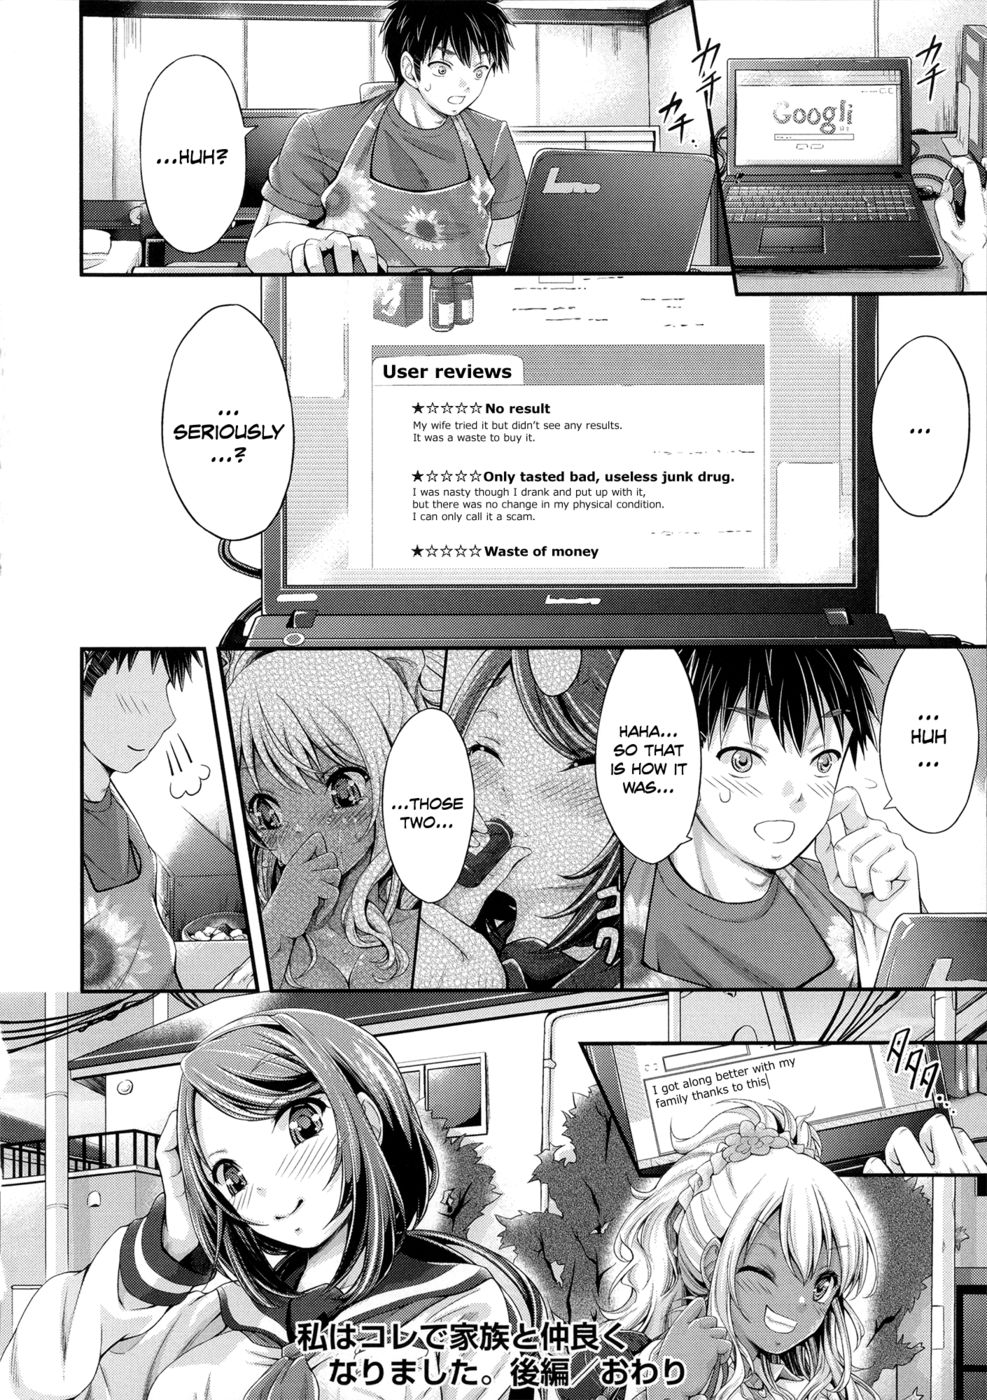 Hentai Manga Comic-This is how I got along better with my family-Chapter 2 - end-24